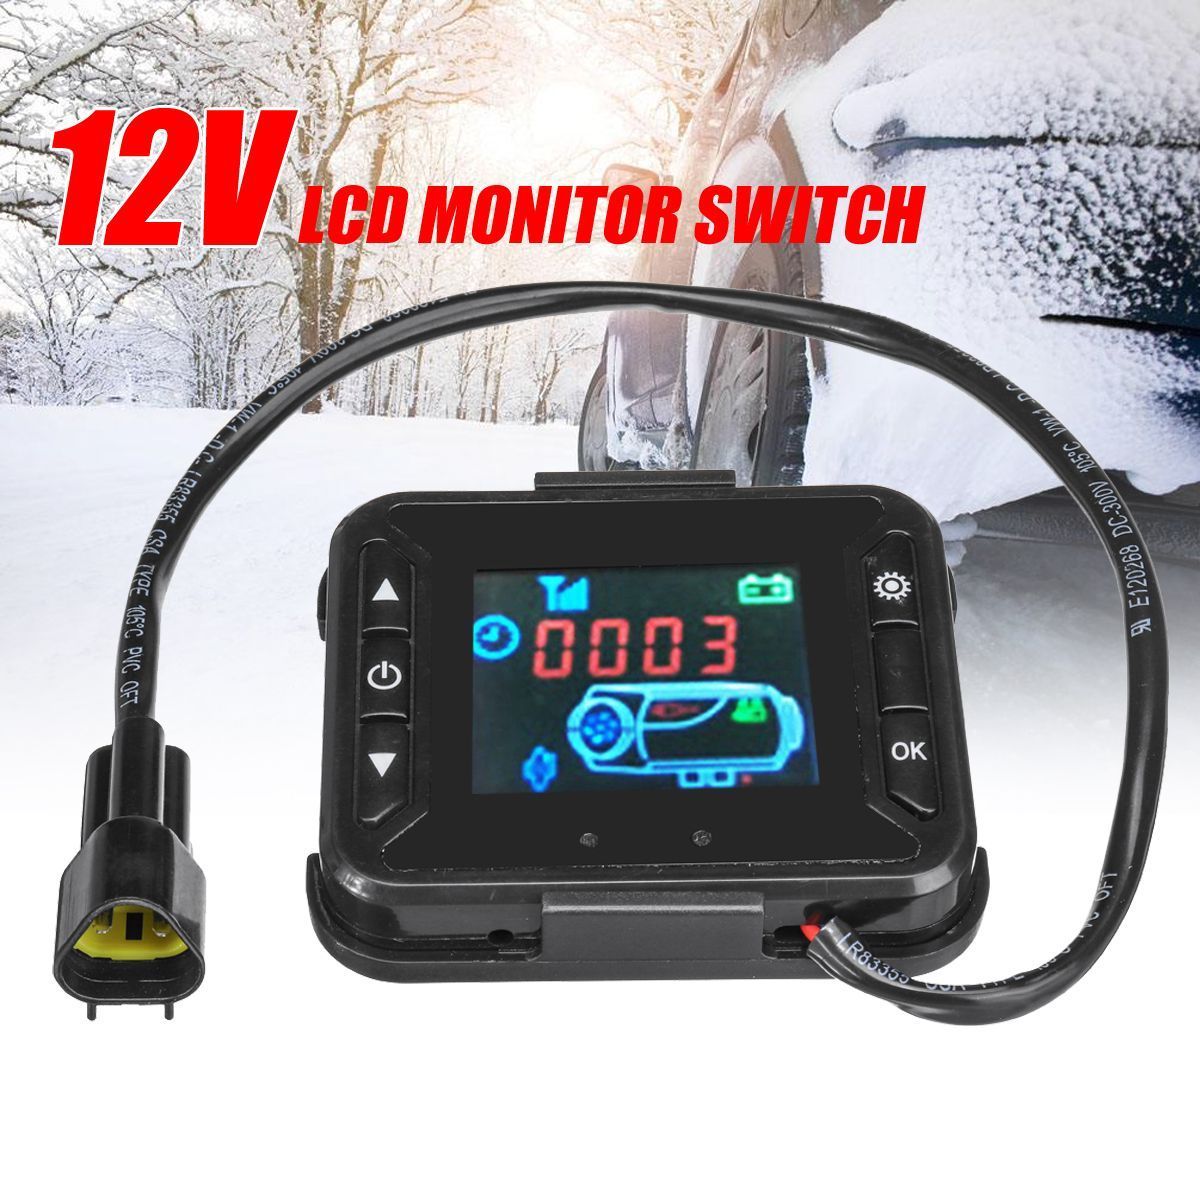 12V-Car-Heater-LCD-Monitor-Switch-Controller-For-Car-Track-Air-Diesel-Heater-1376332